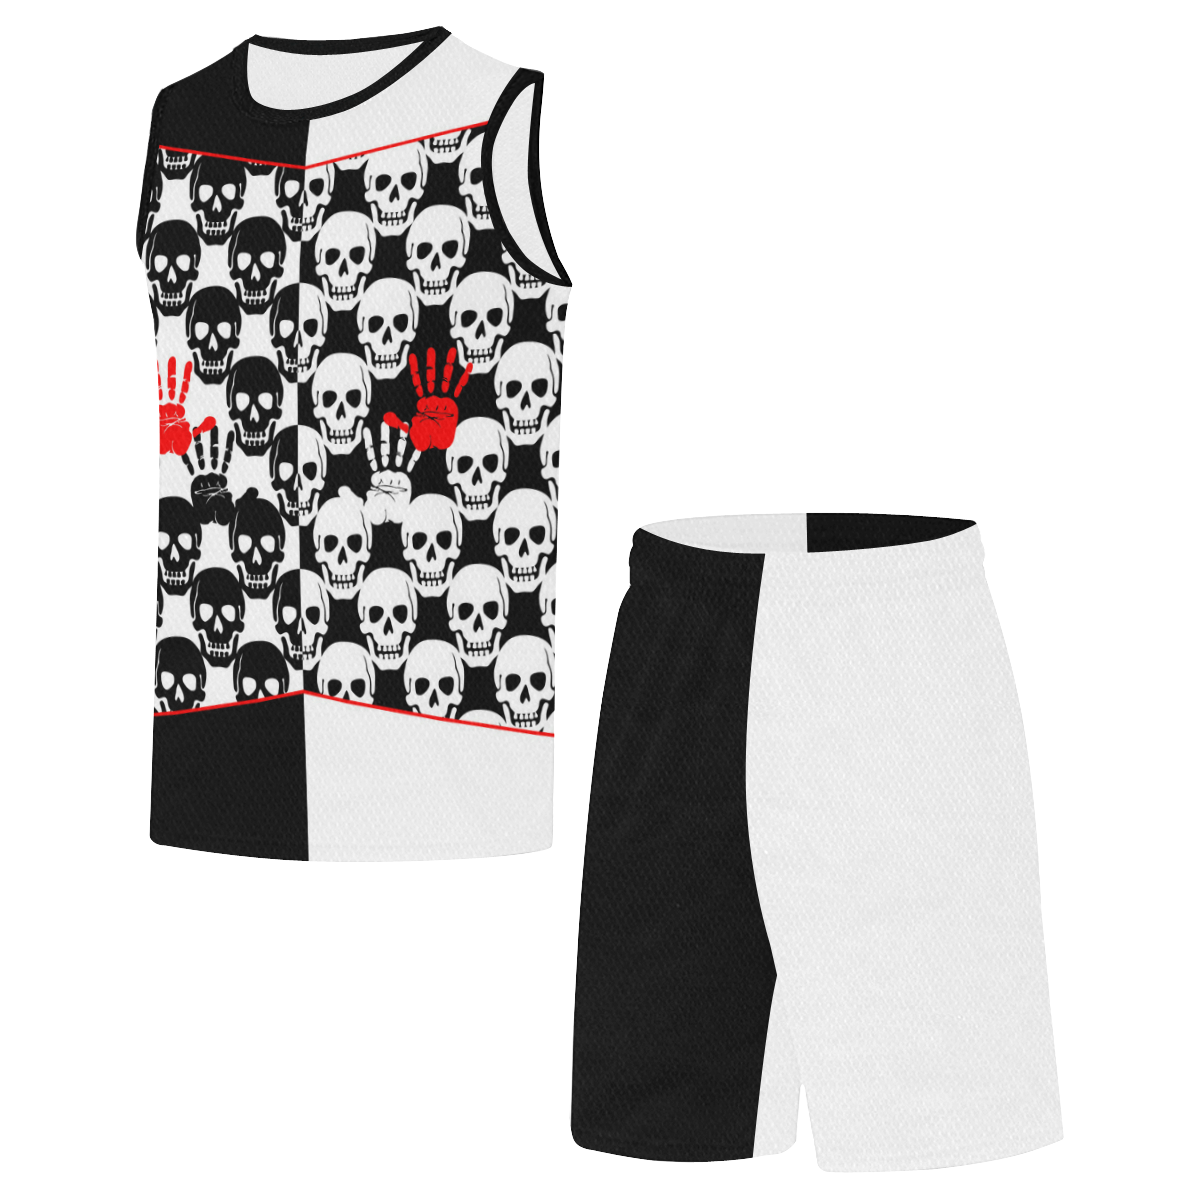 Skulls and Hands - black and white II All Over Print Basketball Uniform